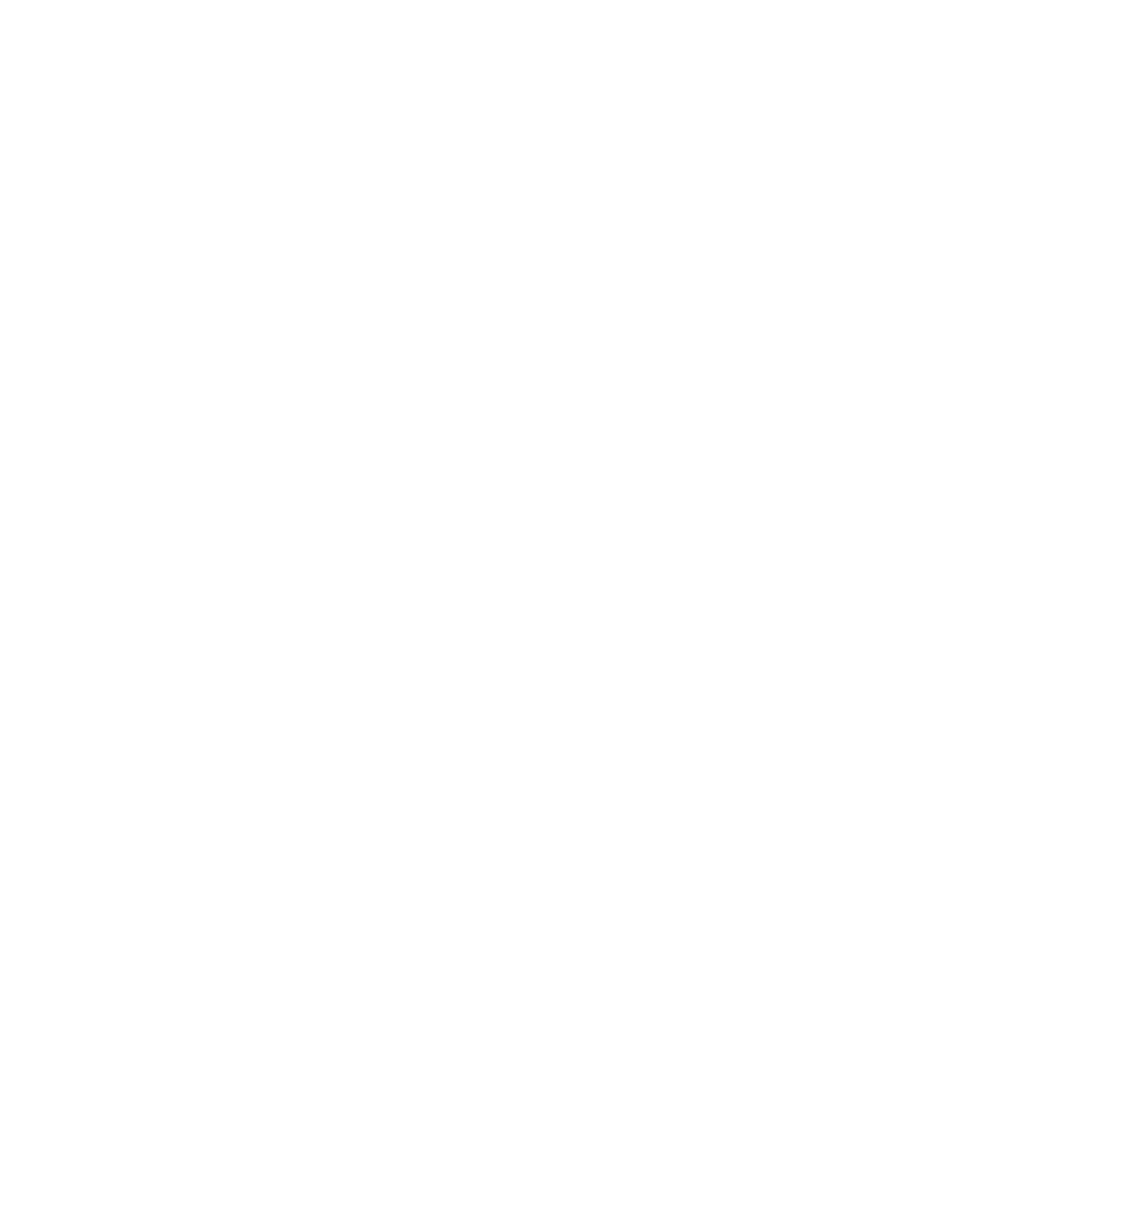 East Town